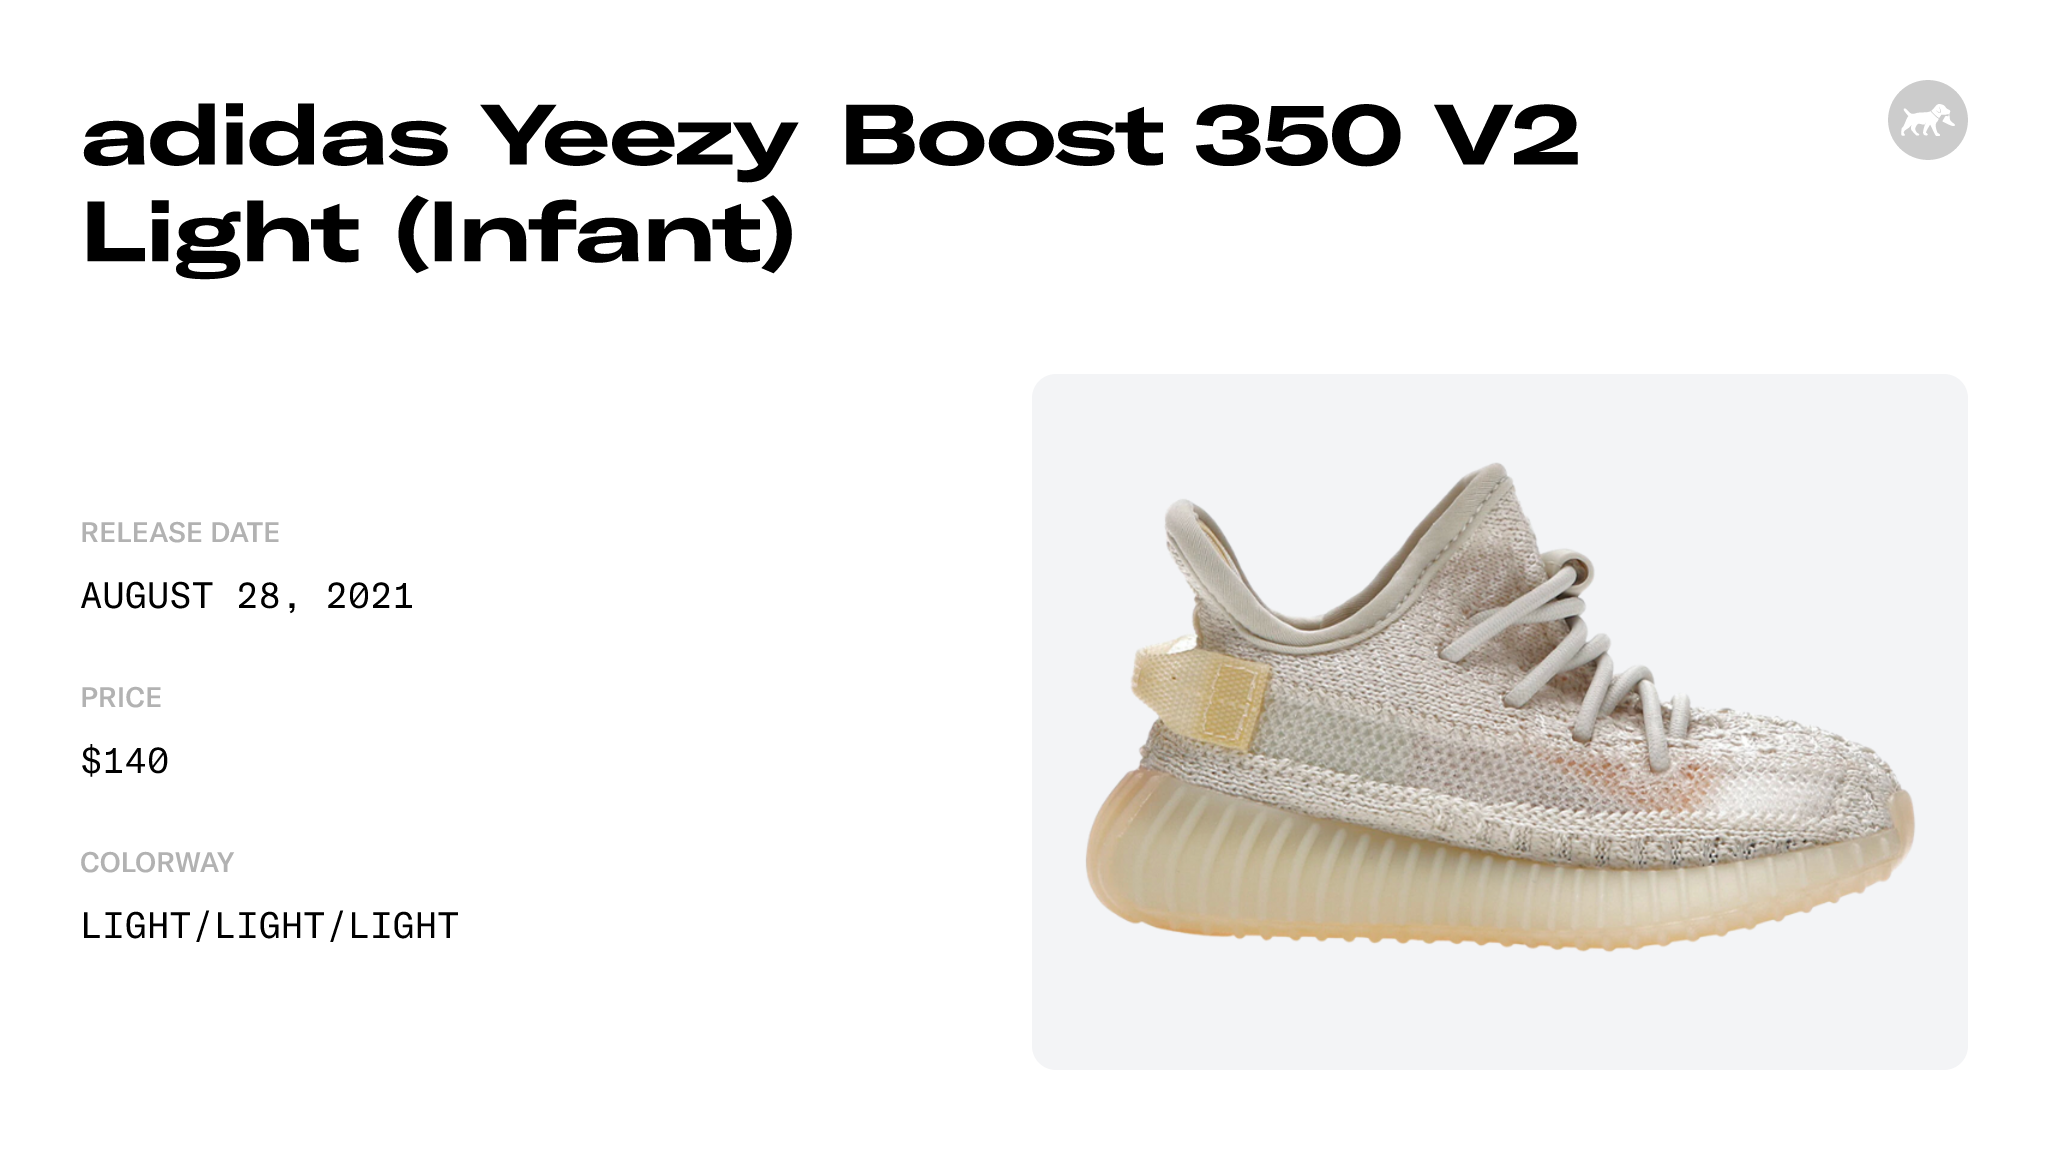 adidas Yeezy Boost 350 V2 Light (Infant) - GY3440 Raffles and Release Date